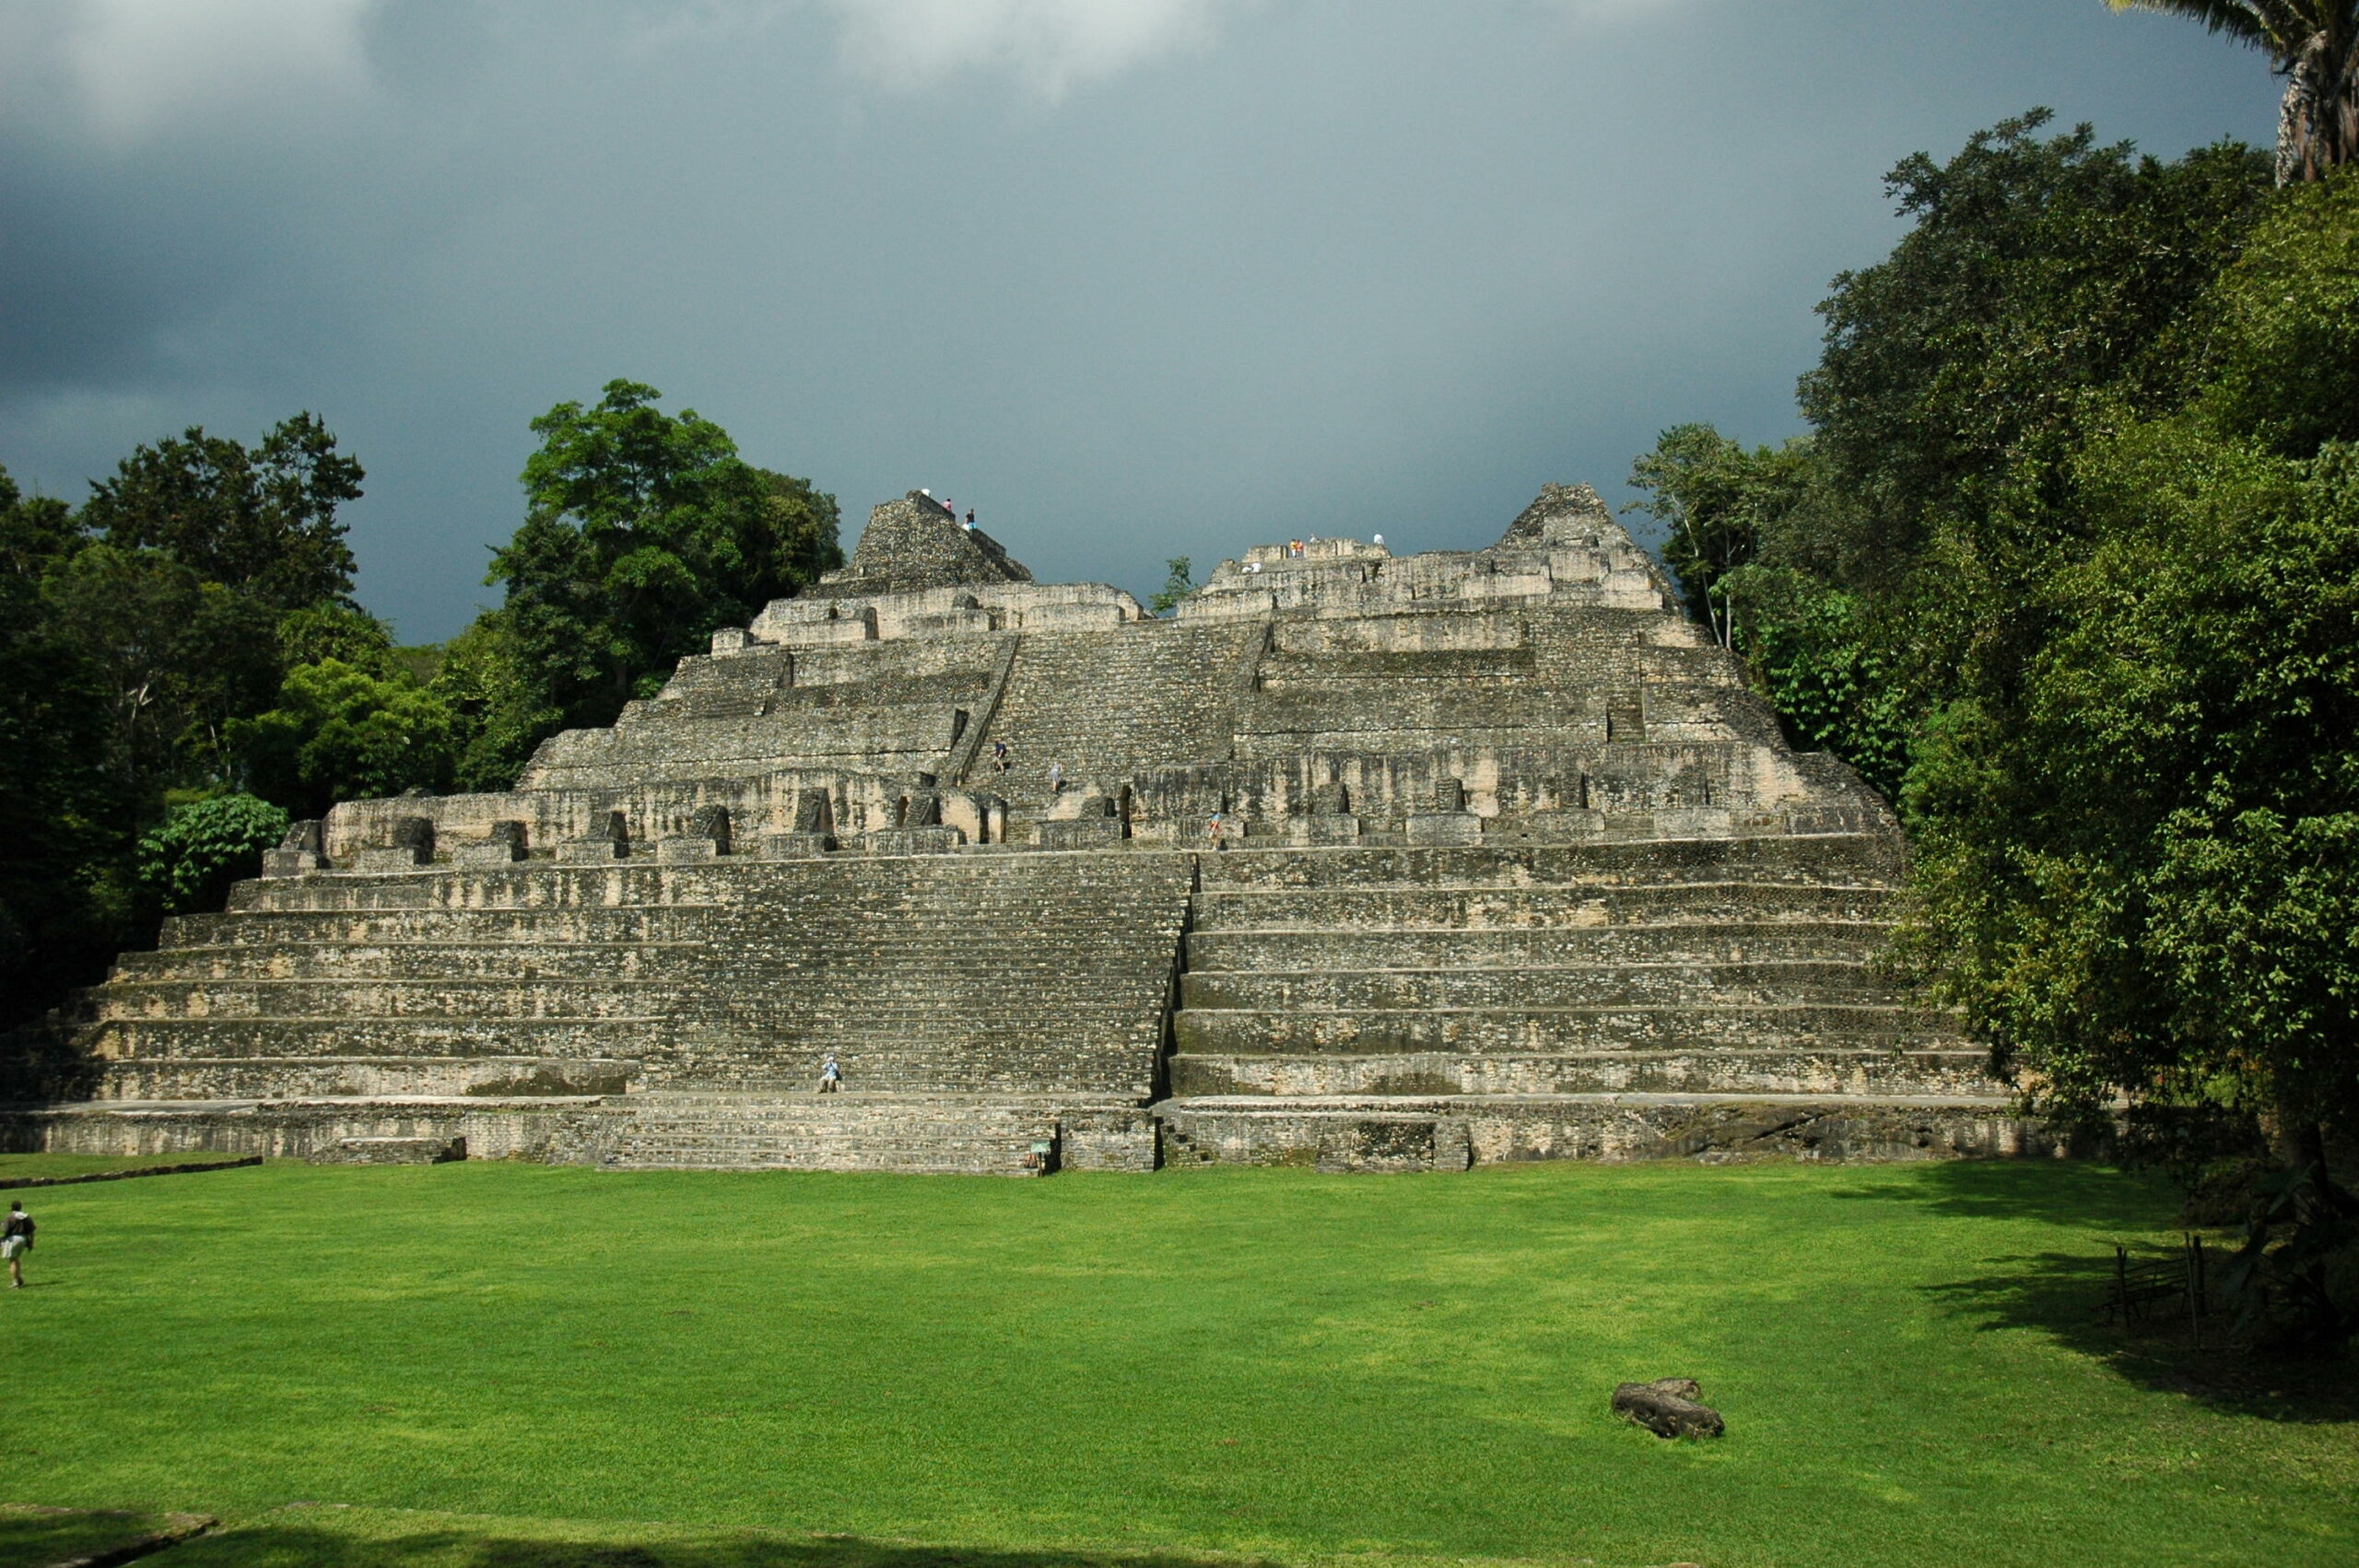 Caracol - The largest pyramid at Caracol, the Canaa,  (Maya for “sky place”) rises 140 feet and is the tallest man made structure in all of Belize